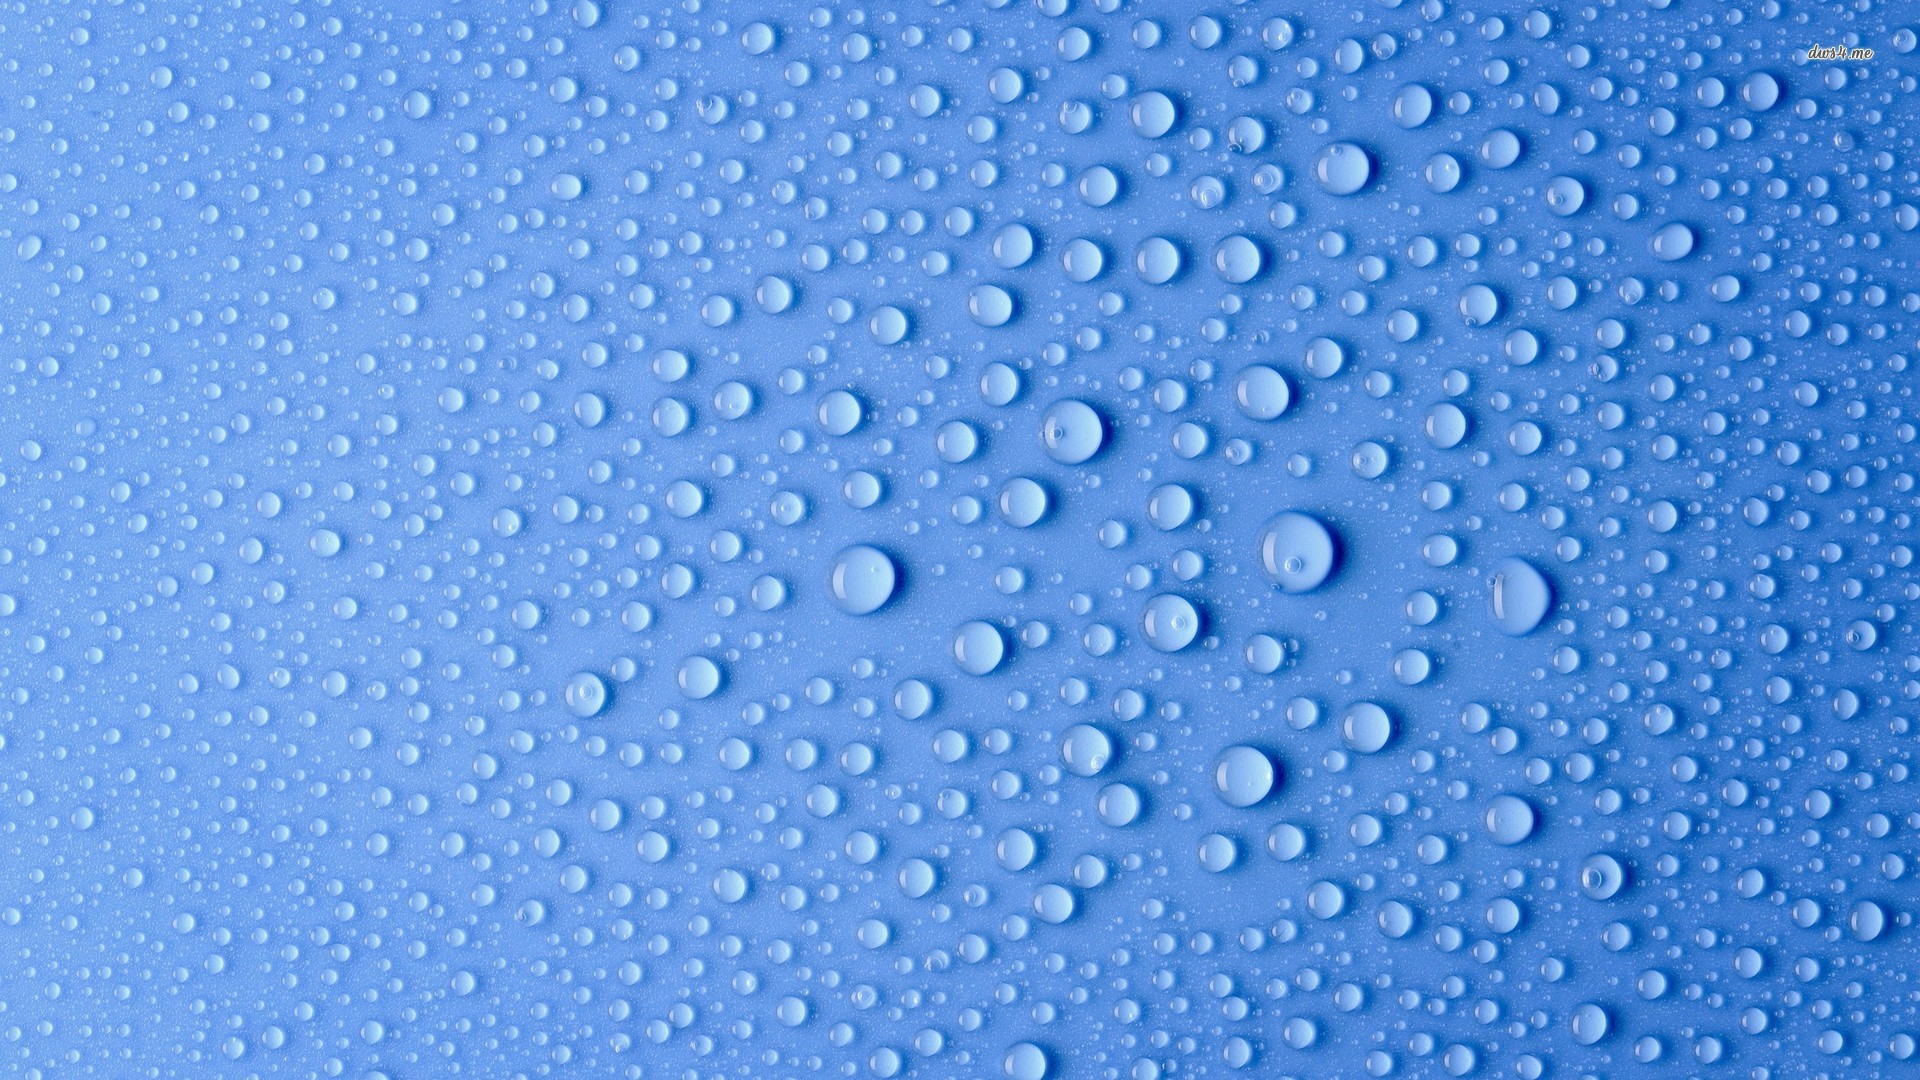 Water Drops Wallpapers, 100% Quality Water Drops HD Images #UU443 ...